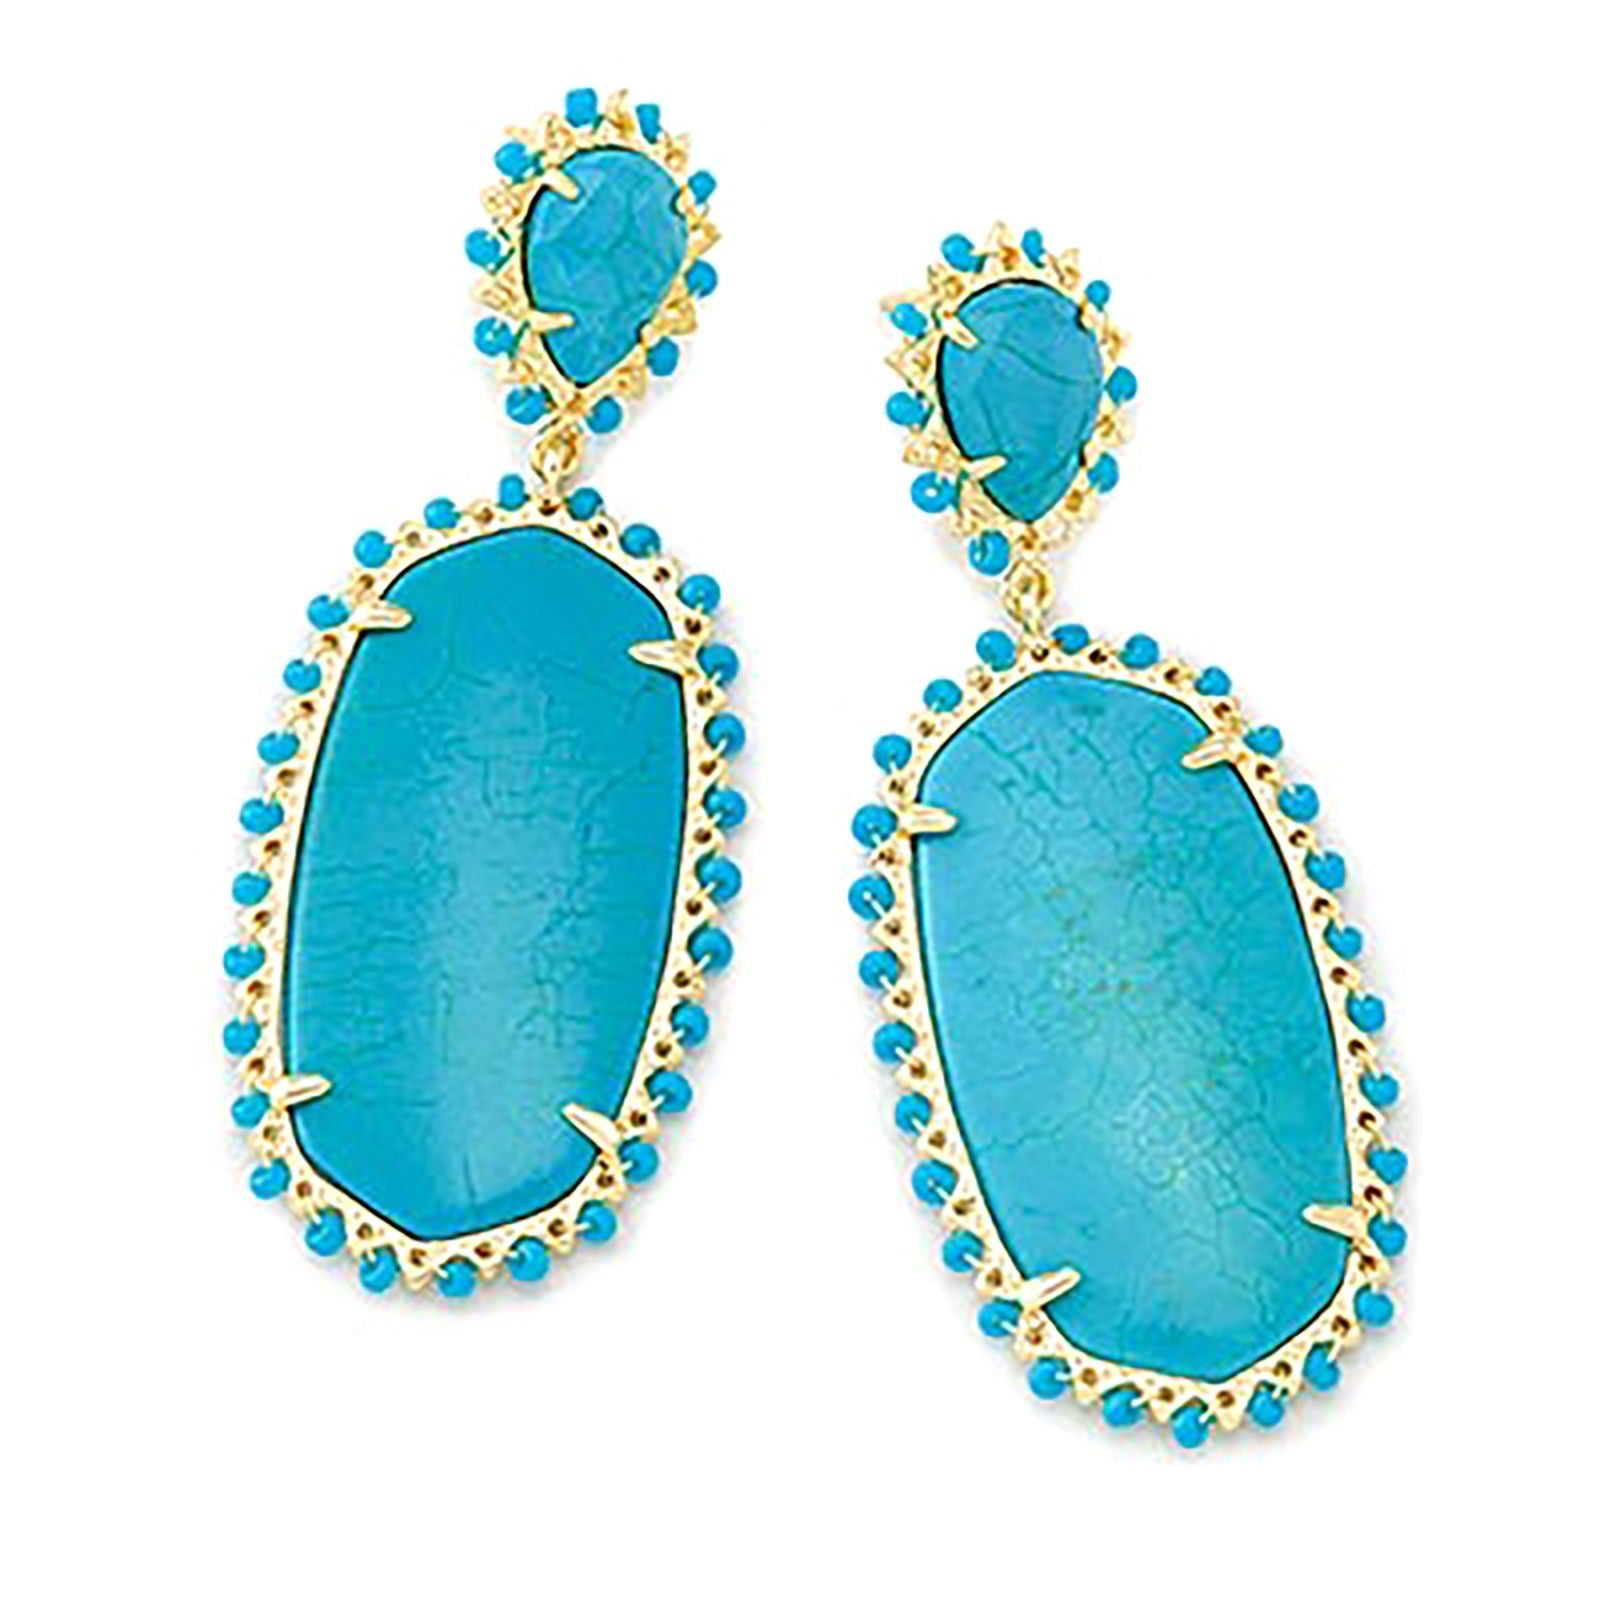 Kendra Scott | Parsons Gold Statement Earrings in Variegated Turquoise Magnesite - Giddy Up Glamour Boutique